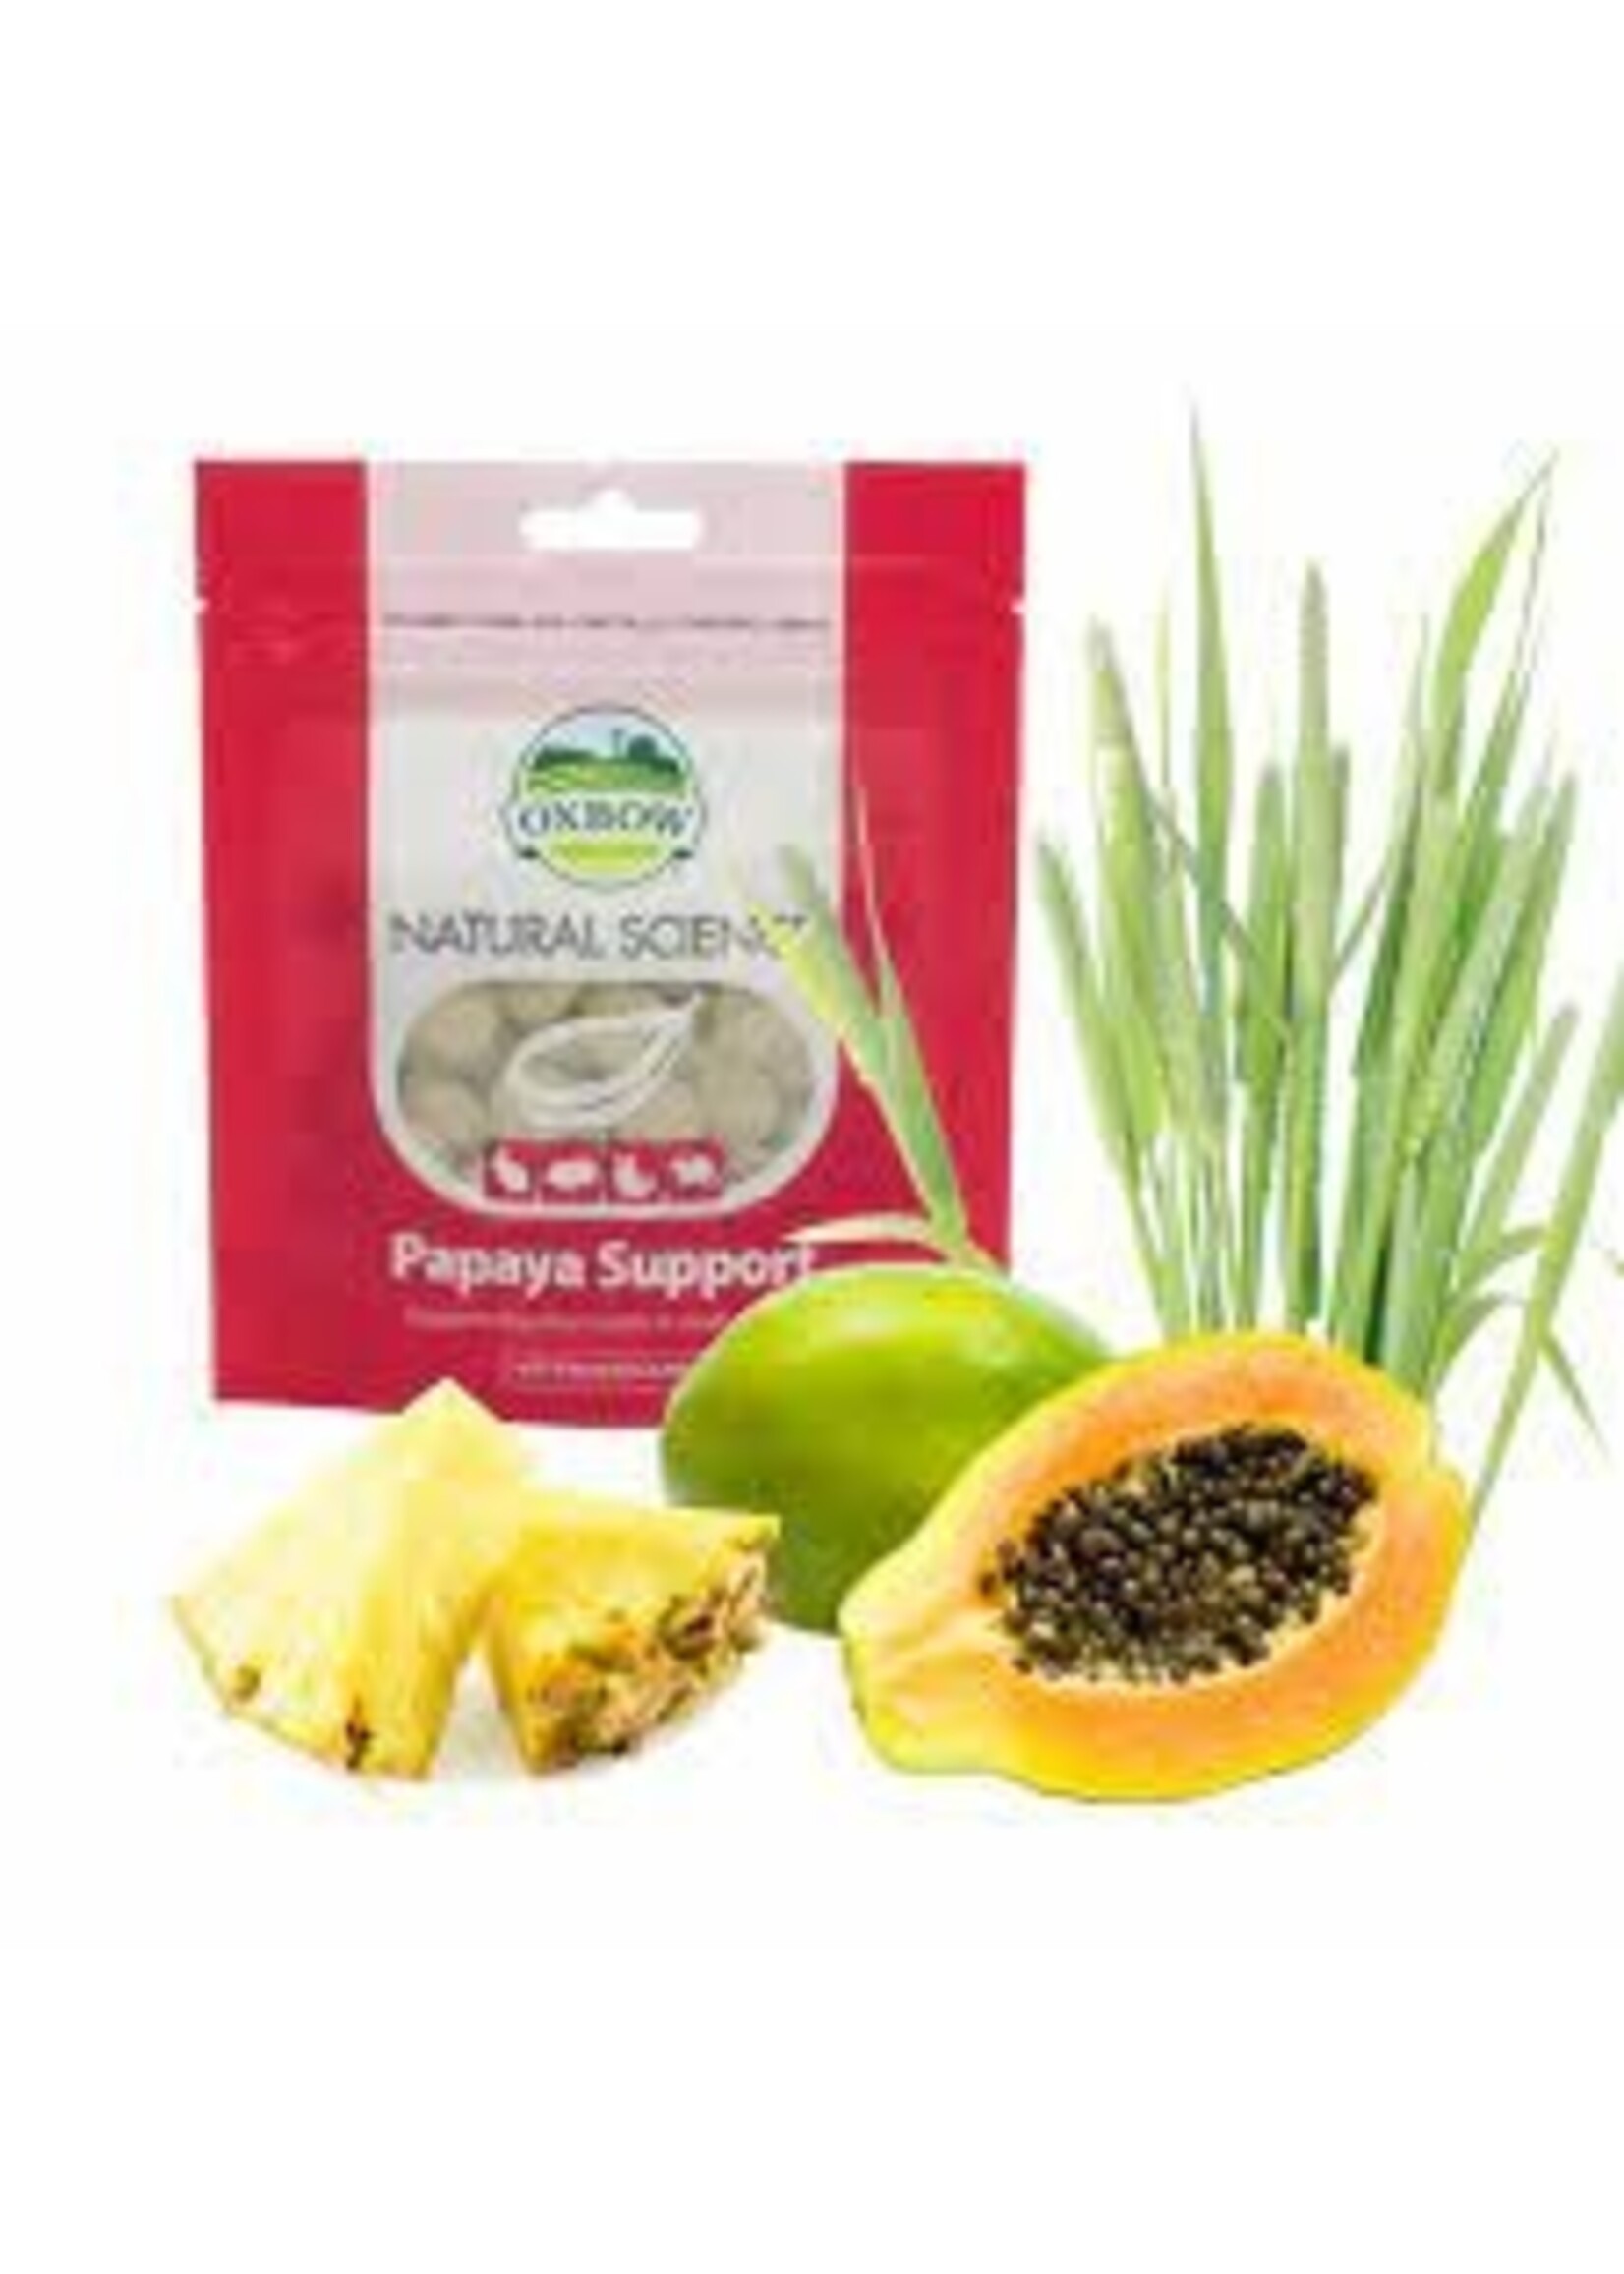 Oxbow Oxbow Natural Science Papaya Support 32.9g